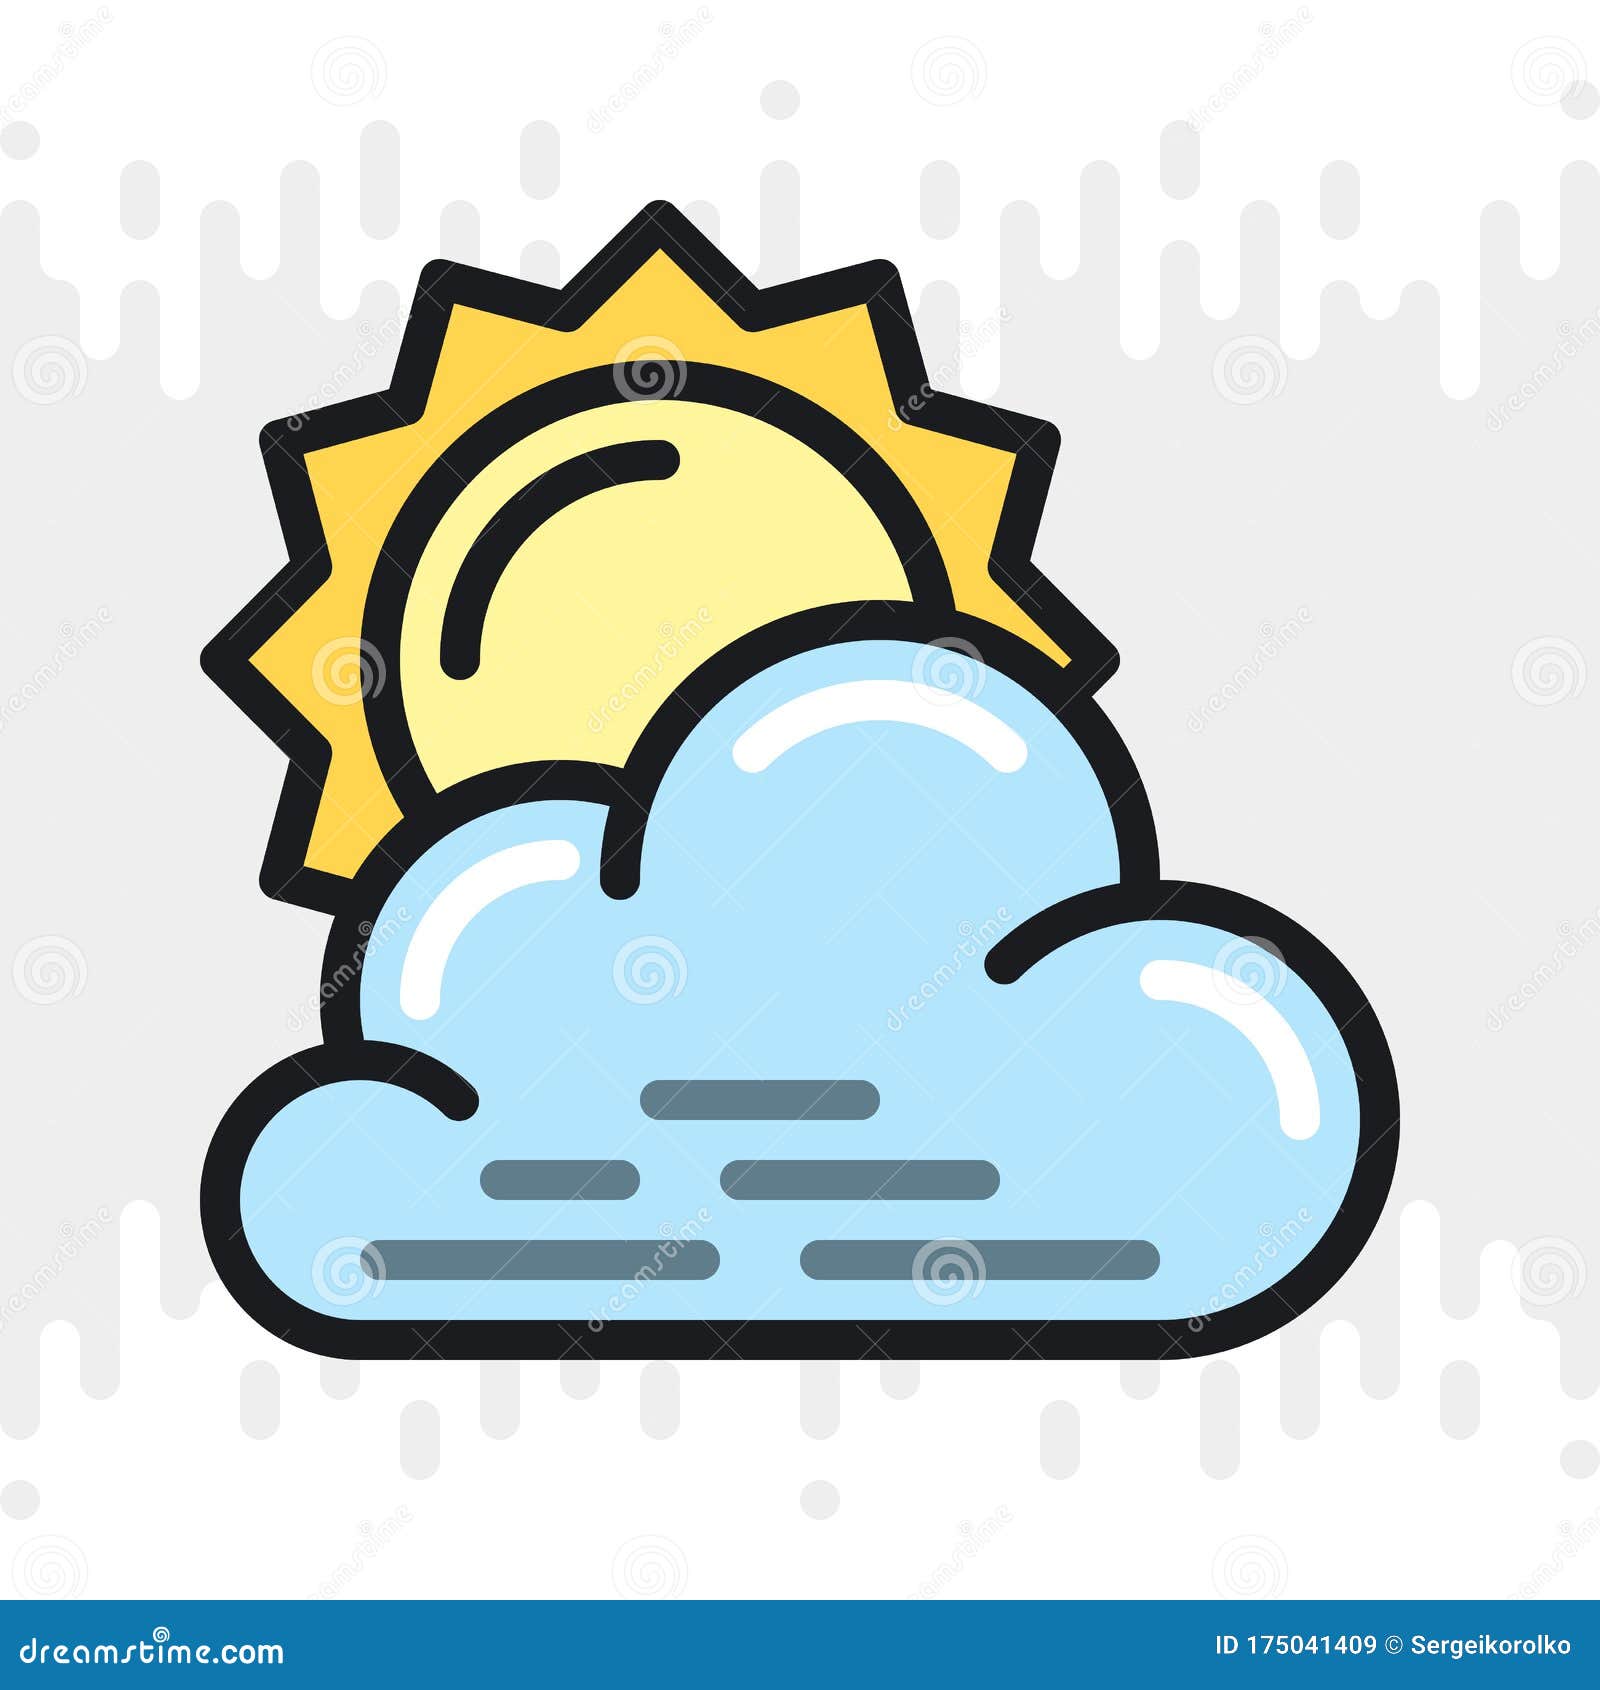 Partly Cloudy Or Partially Cloudy Icon For Weather Forecast Application Or Widget Sun Behind The Cloud Color Version Stock Vector Illustration Of Cloudy Metcast